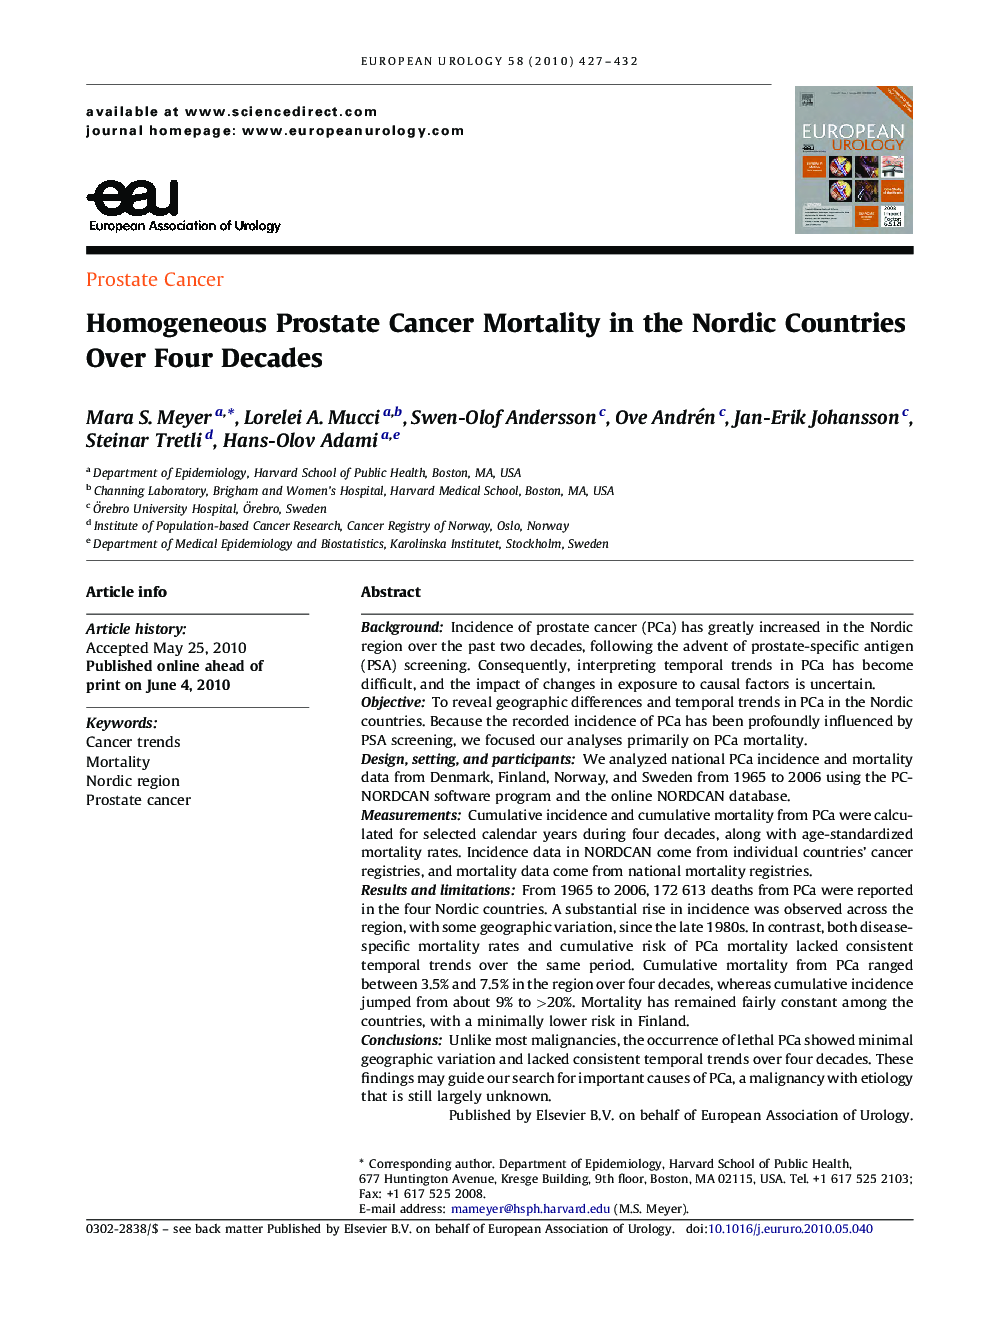 Homogeneous Prostate Cancer Mortality in the Nordic Countries Over Four Decades